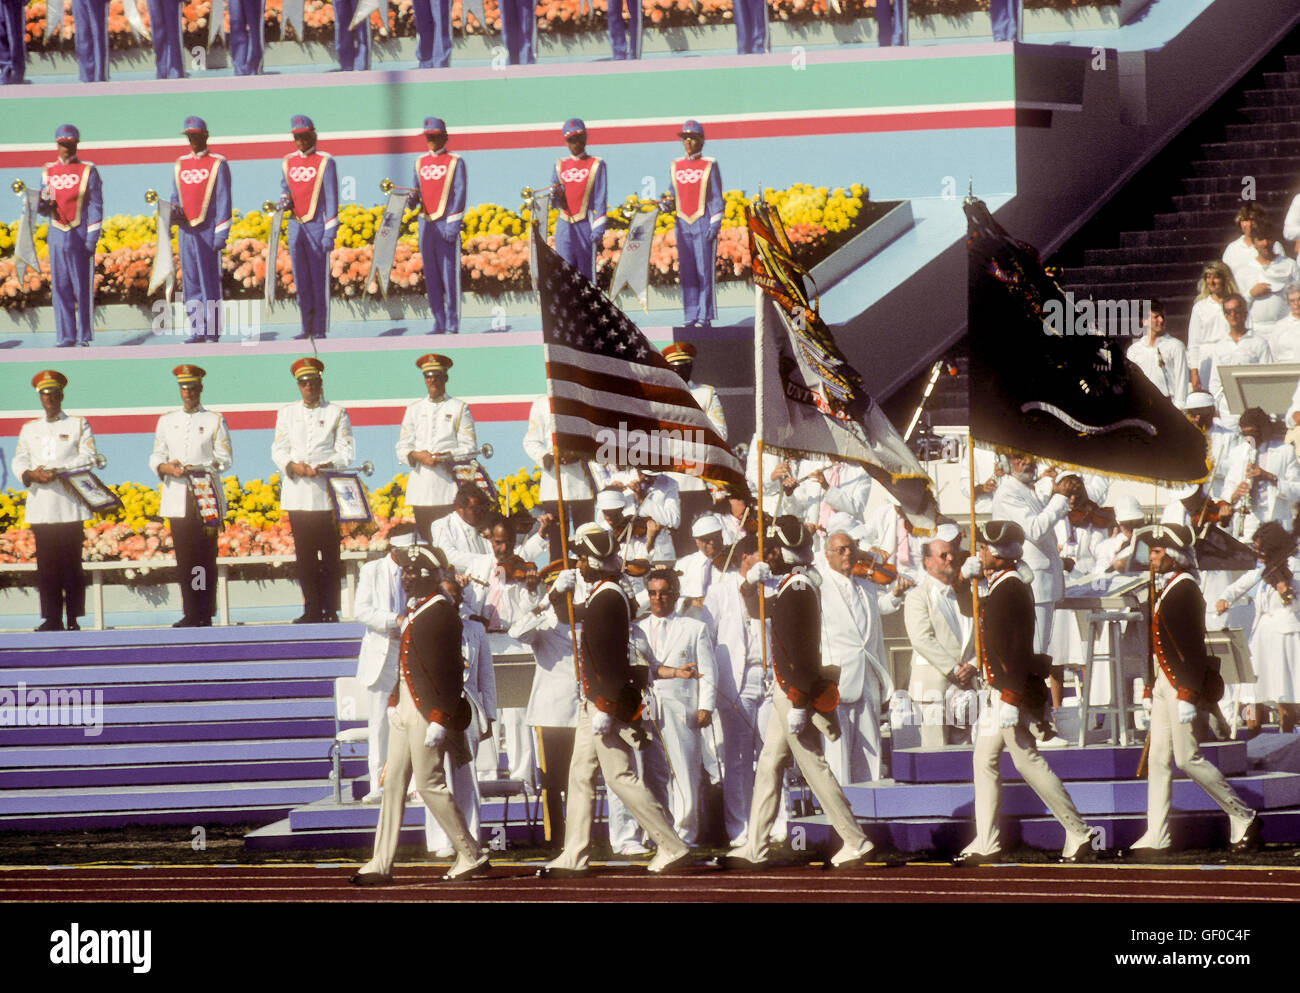 Flag ceremony during Opening Ceremonies at L.A. Memorial Coliseum during 1984 Olympic Games in Los Angeles. Stock Photo